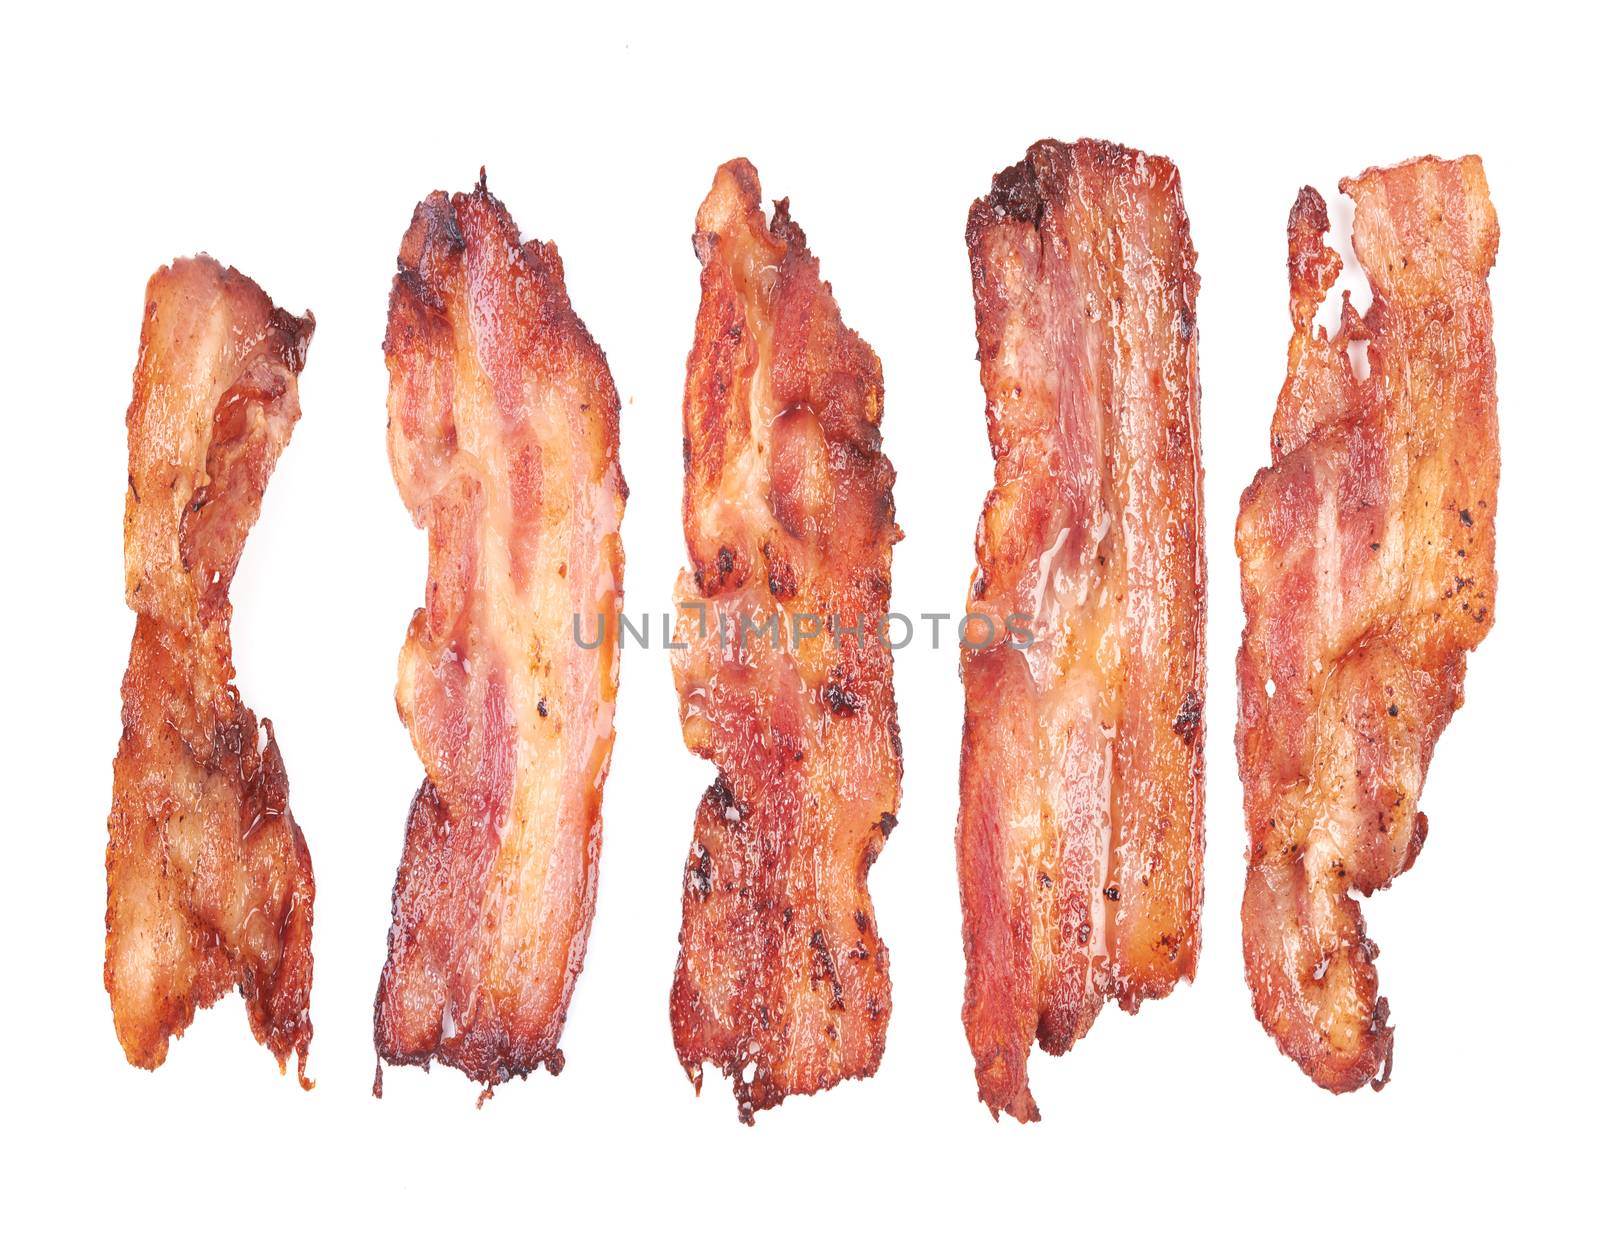 cooked slices of bacon isolated on white 